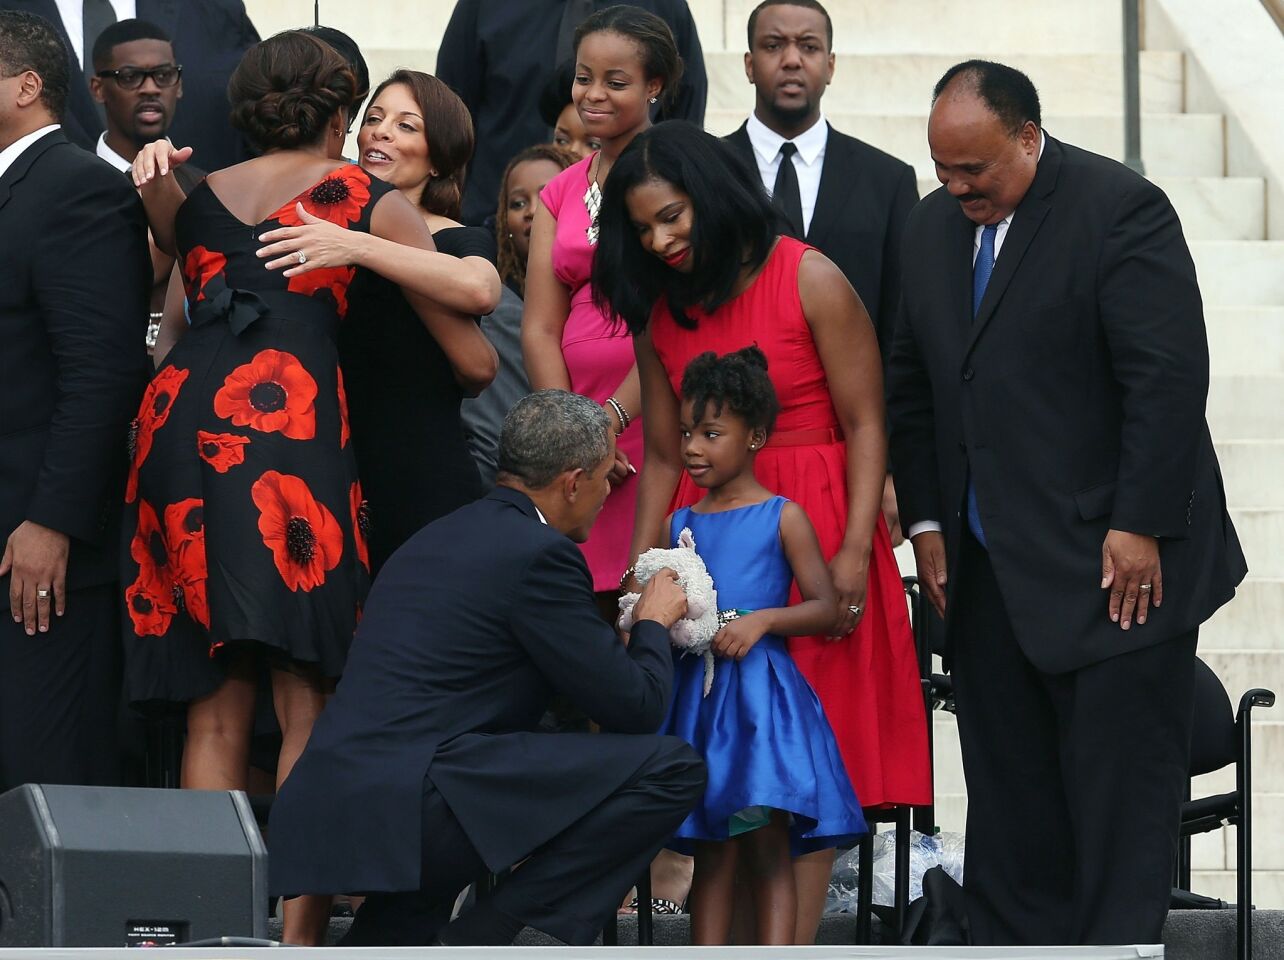 President Obama greets Yolanda King, daughter of Martin Luther King III, who looks on alongside his wife, Andrea King.